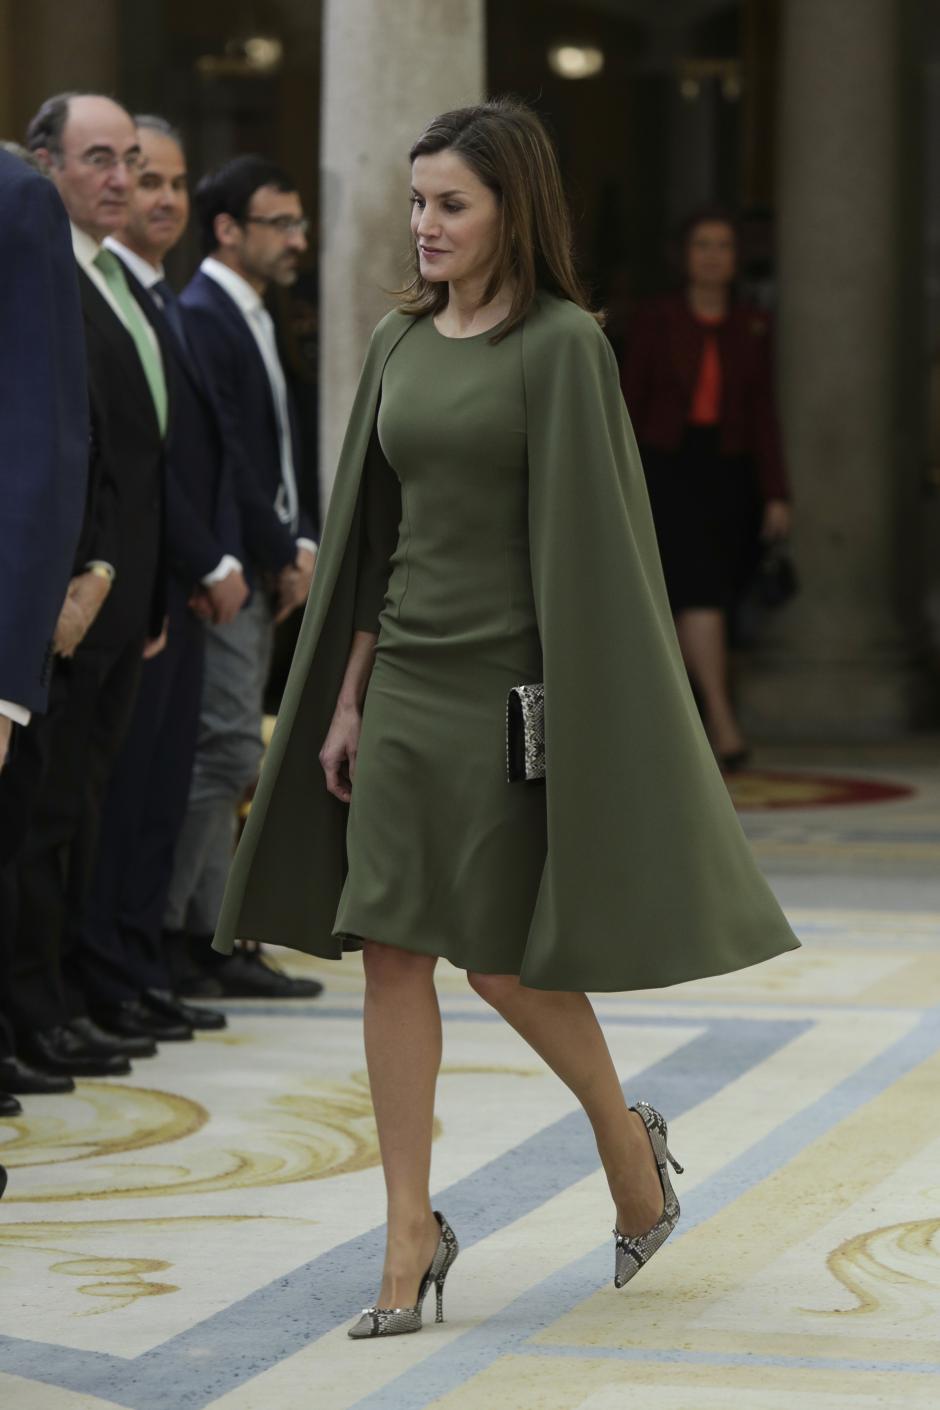 Queen Letizia Ortiz at the Sports National Awards in Madrid, Spain, on Monday February 19, 2018